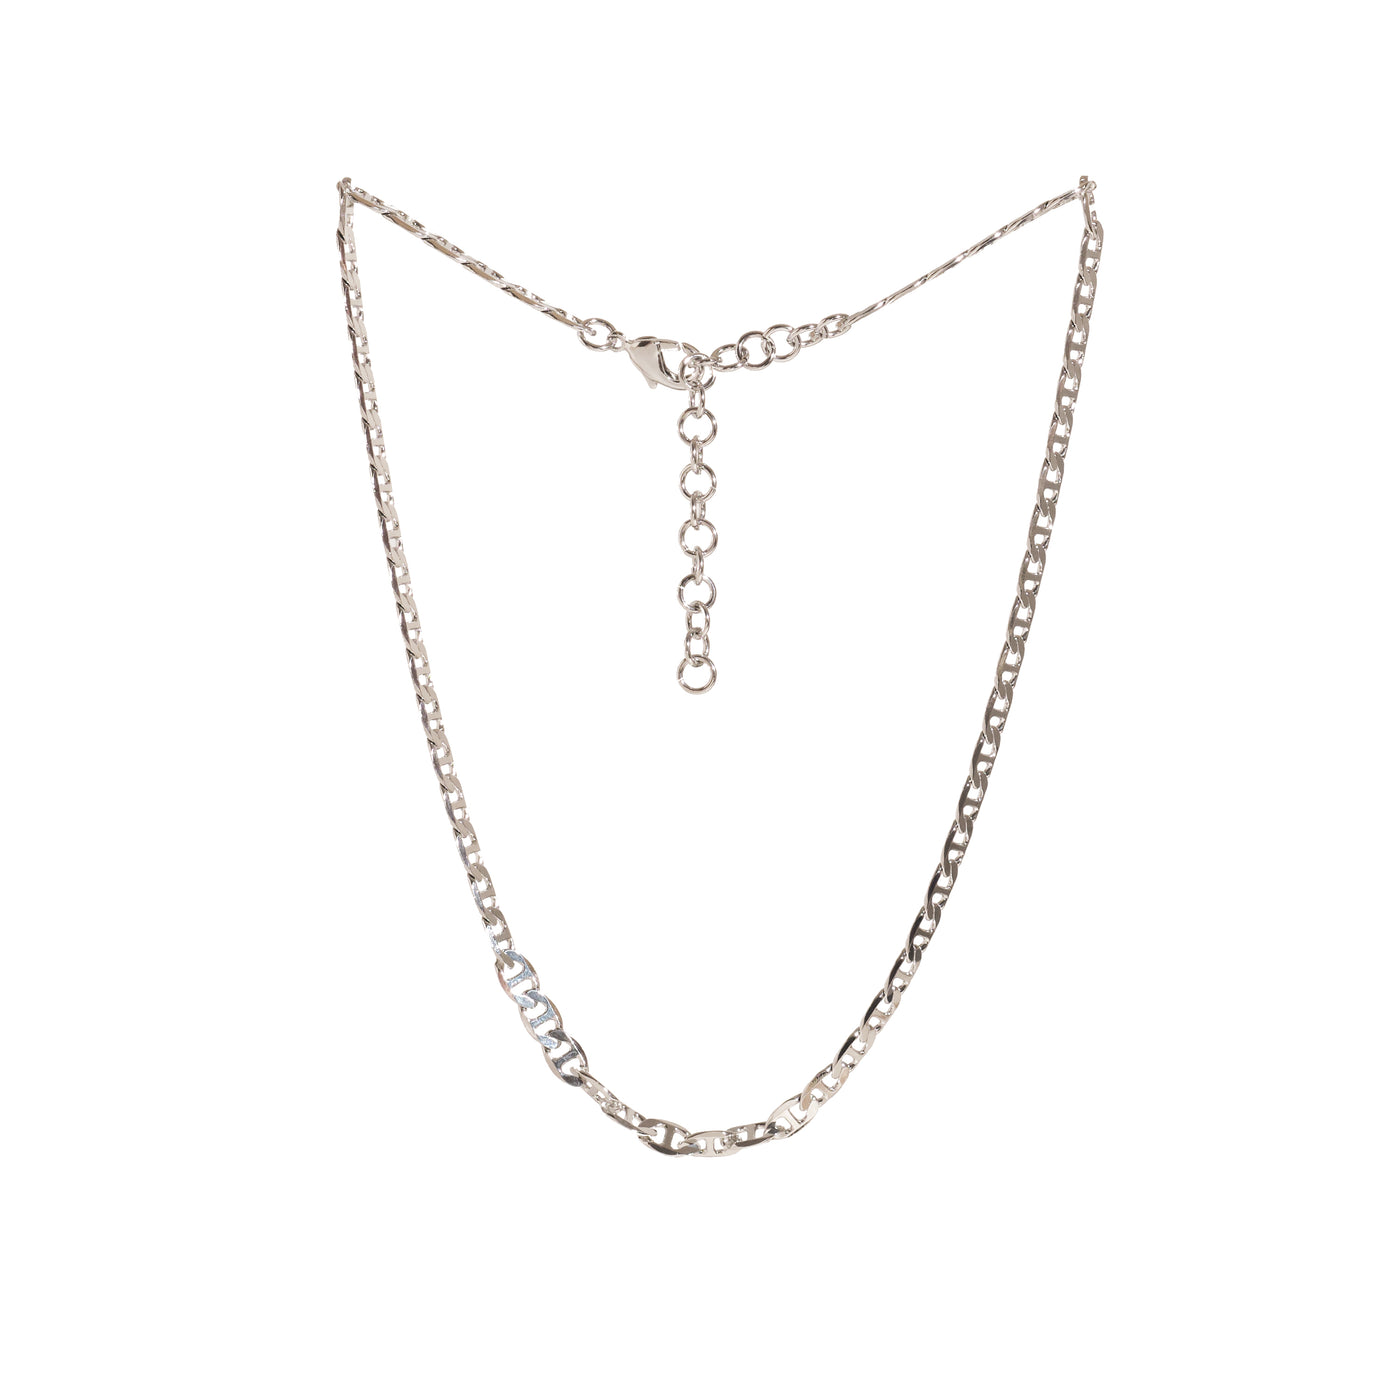 Grande Elouise Chain Necklace, 925 Silver